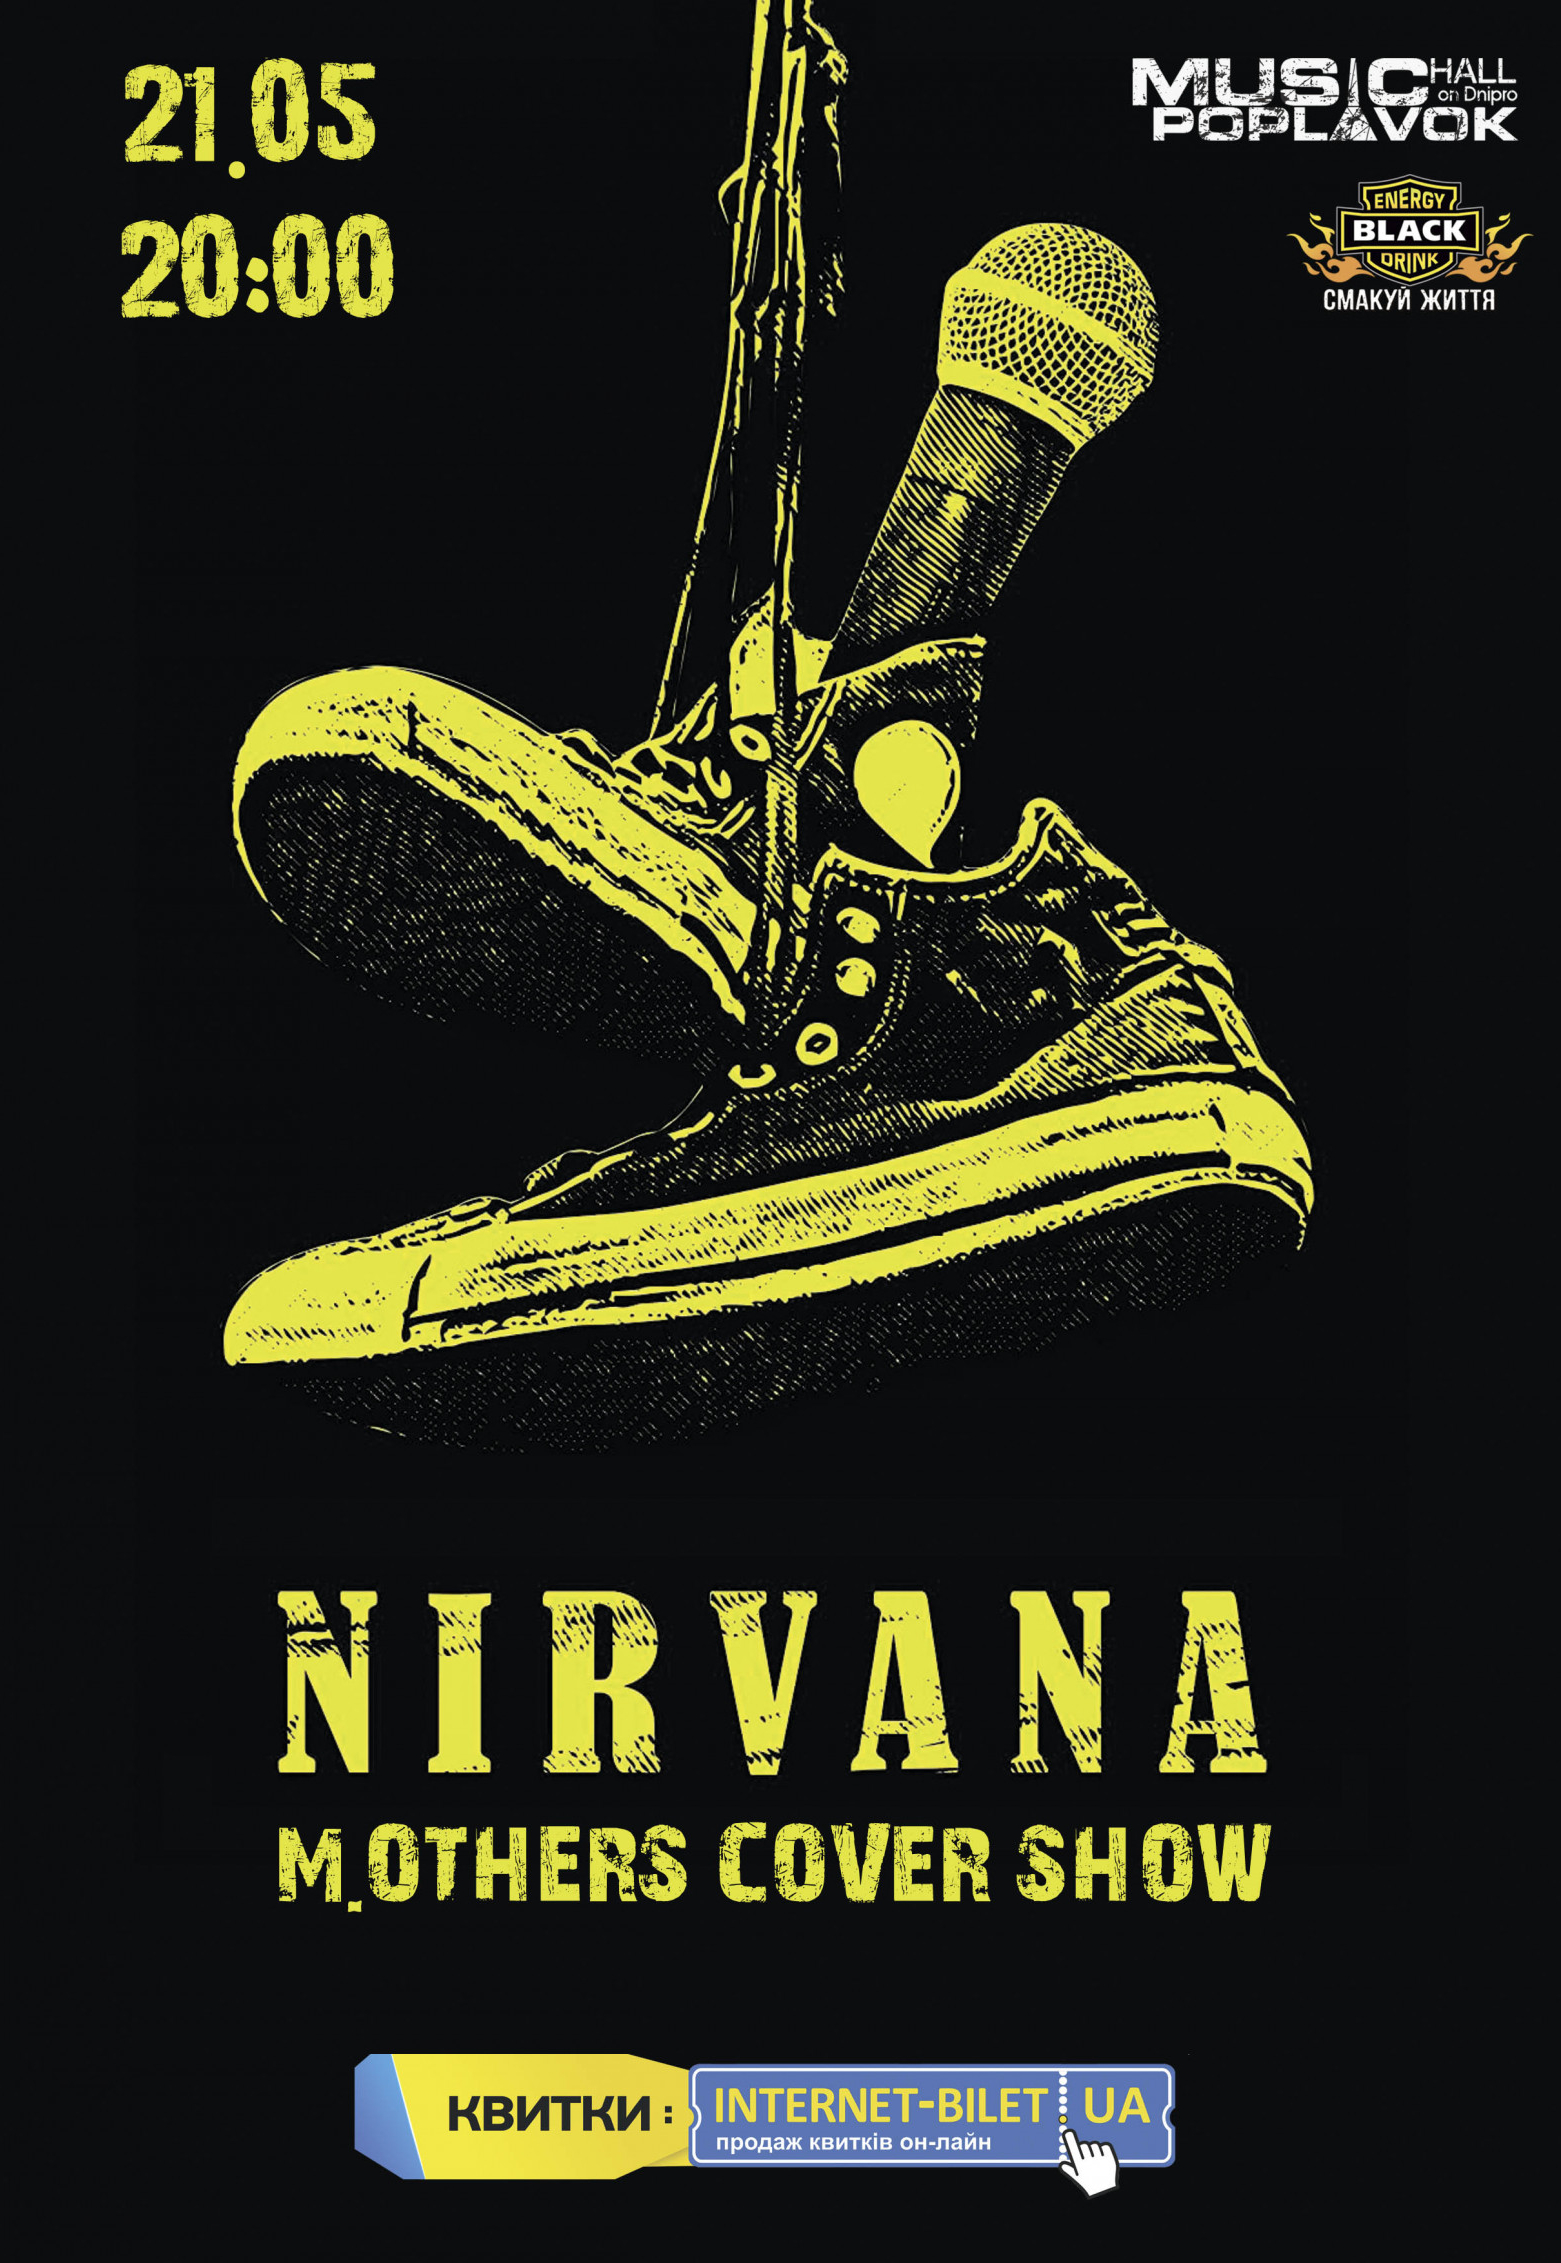 NIRVANA - M.Others cover-show Днепр, 21.05.2021, купить билеты. Афиша Днепра